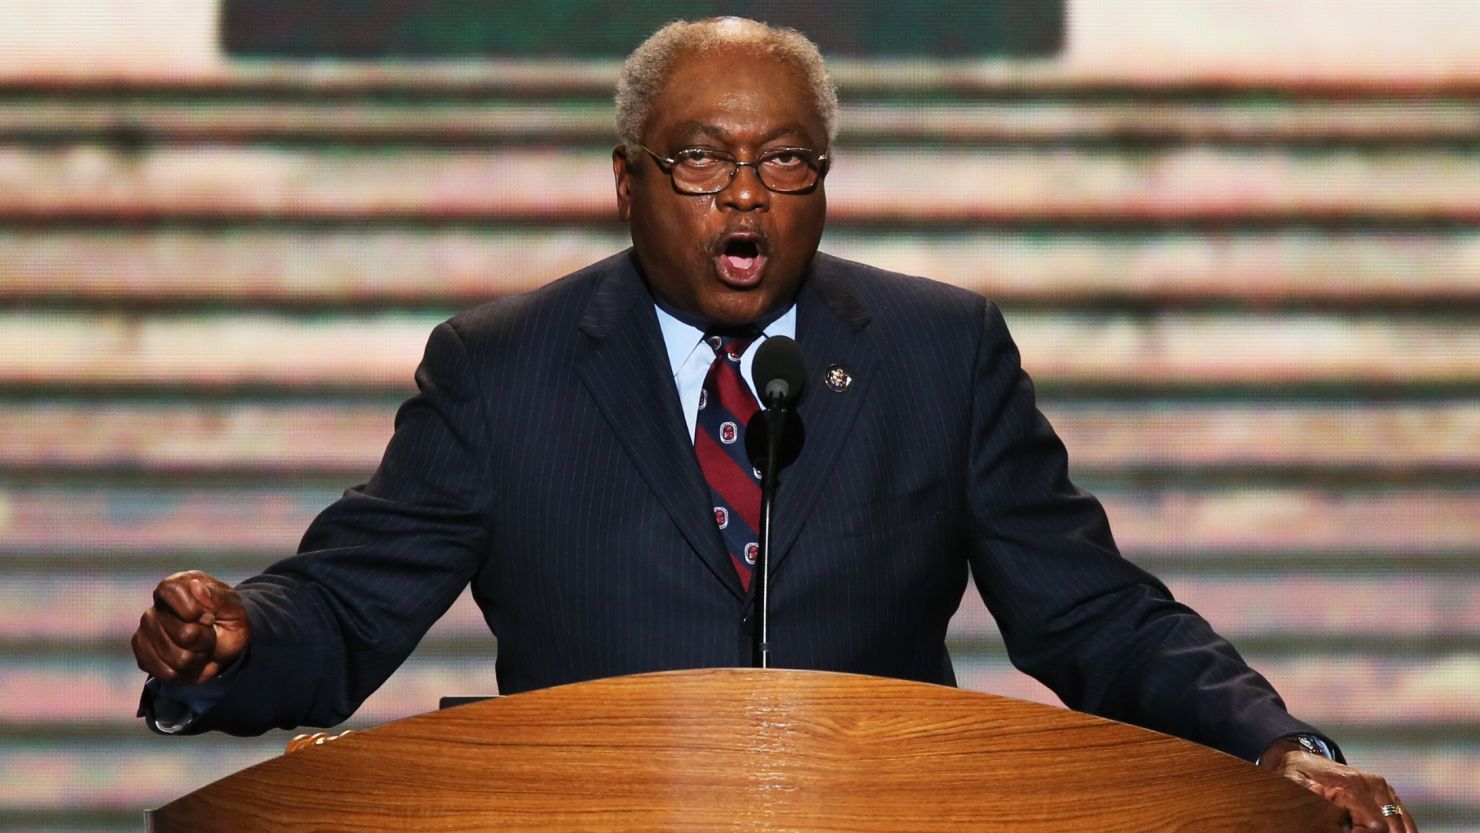 The No. 3 House Democrat Jim Clyburn reserving judgment on Syria